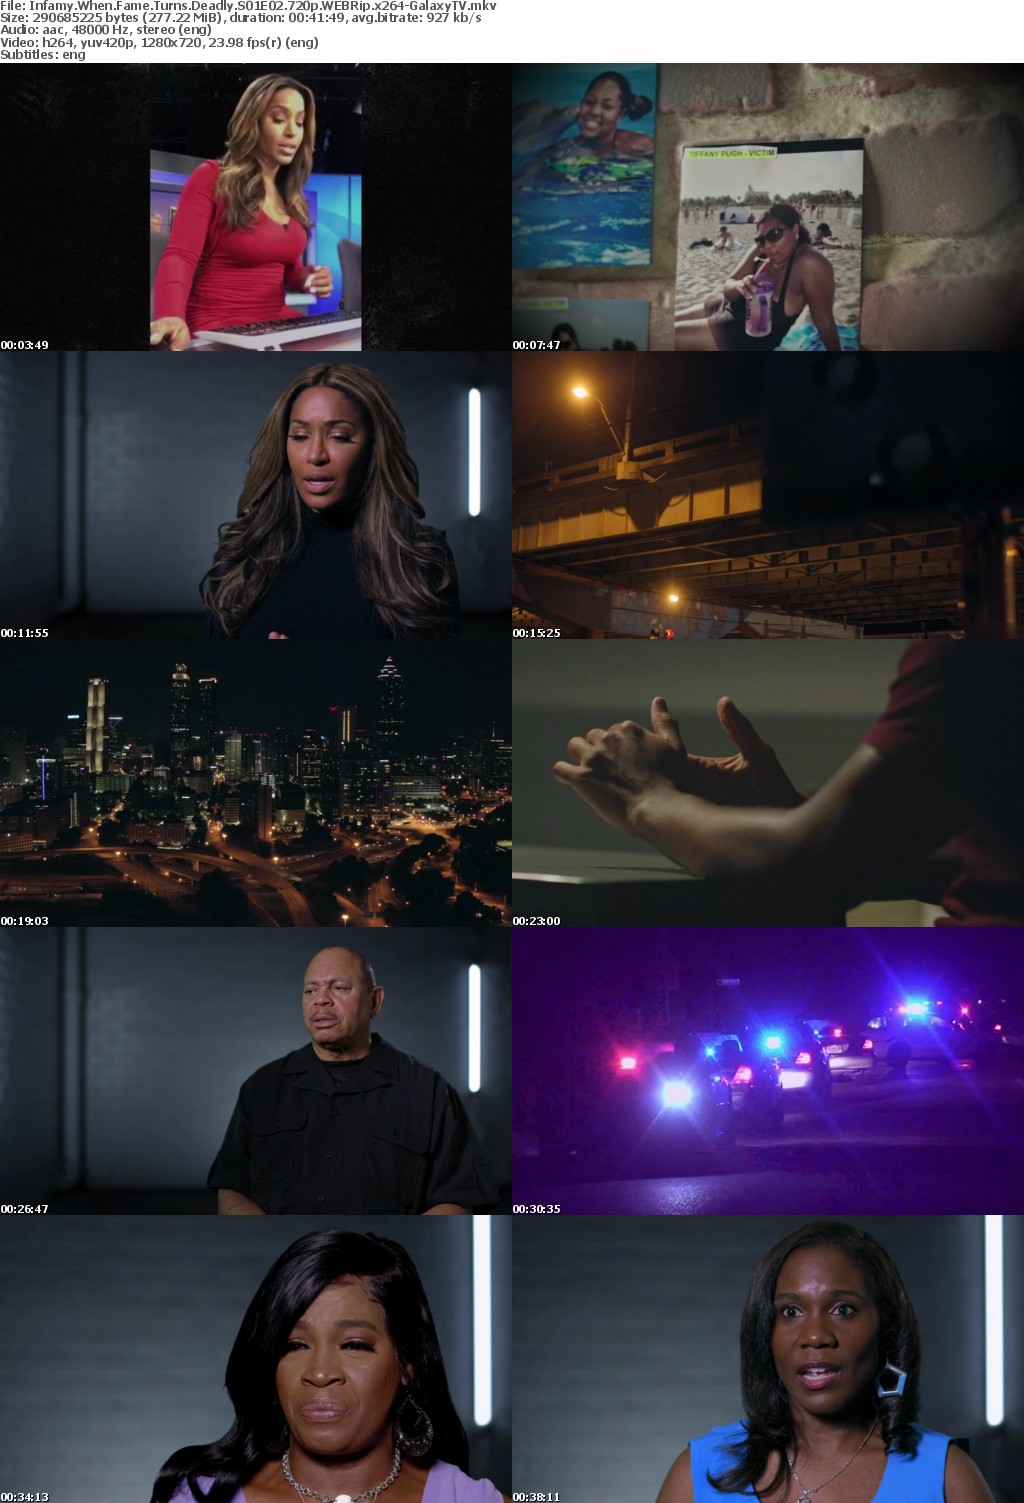 Infamy When Fame Turns Deadly S01 COMPLETE 720p WEBRip x264-GalaxyTV